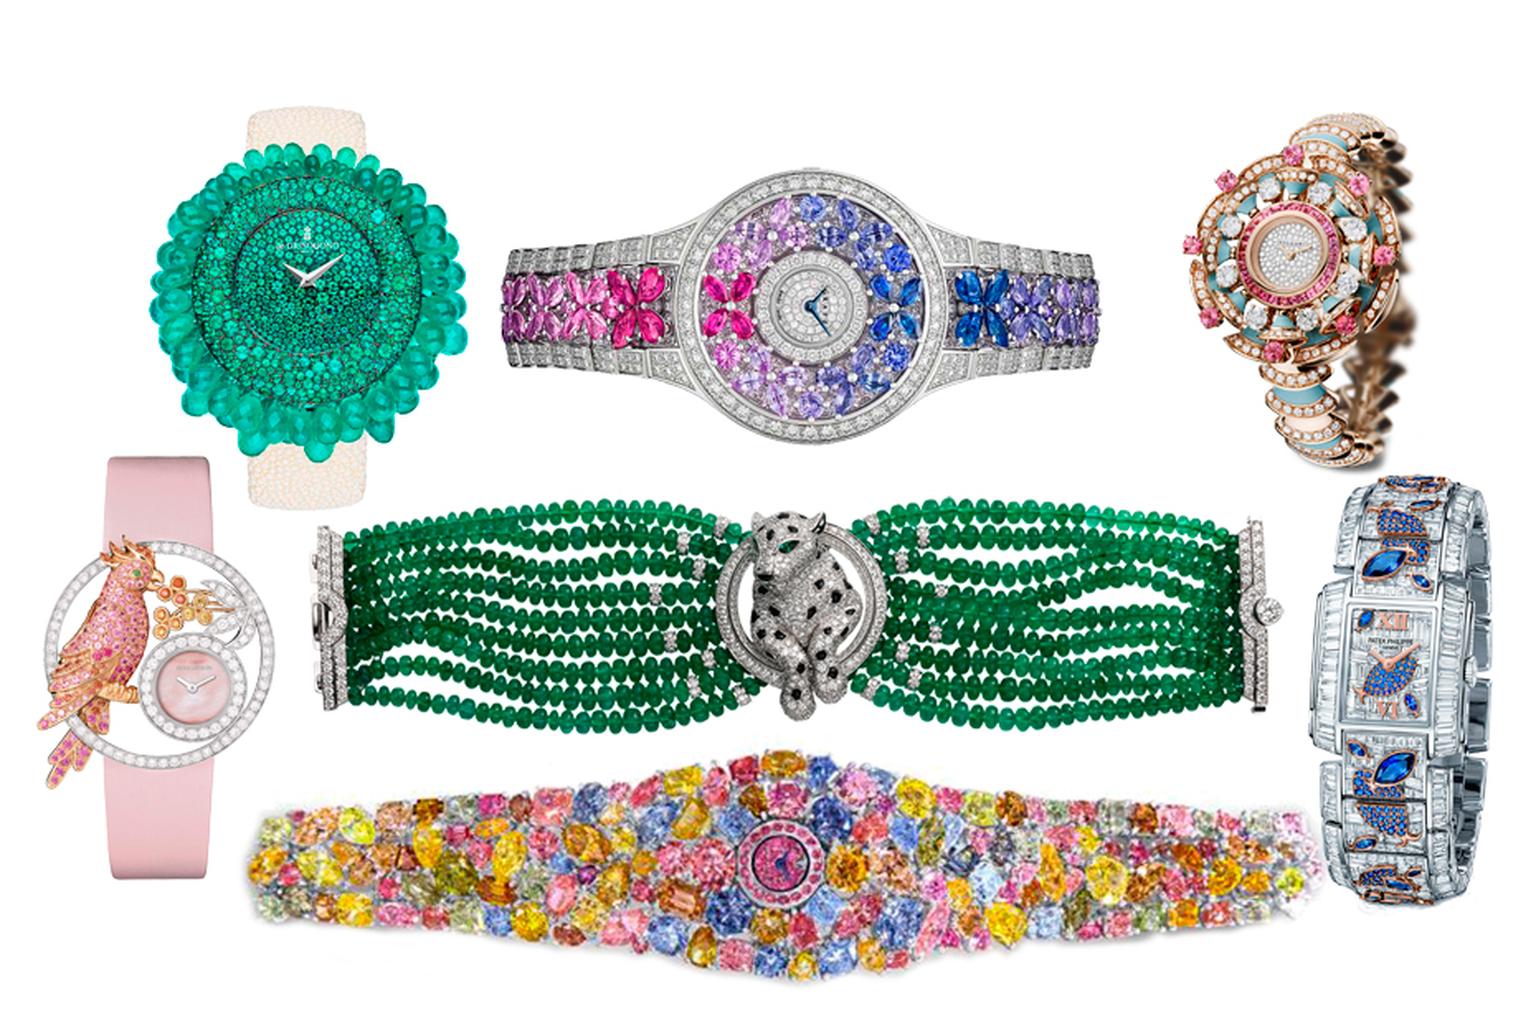 2014 was a very generous year for high jewellery watches with dazzling beauties popping up the SIHH, Baselworld and the Biennale des Antiquaires buoyed by an ever-growing appetite for coloured gemstones and diamonds. Viva 2014!